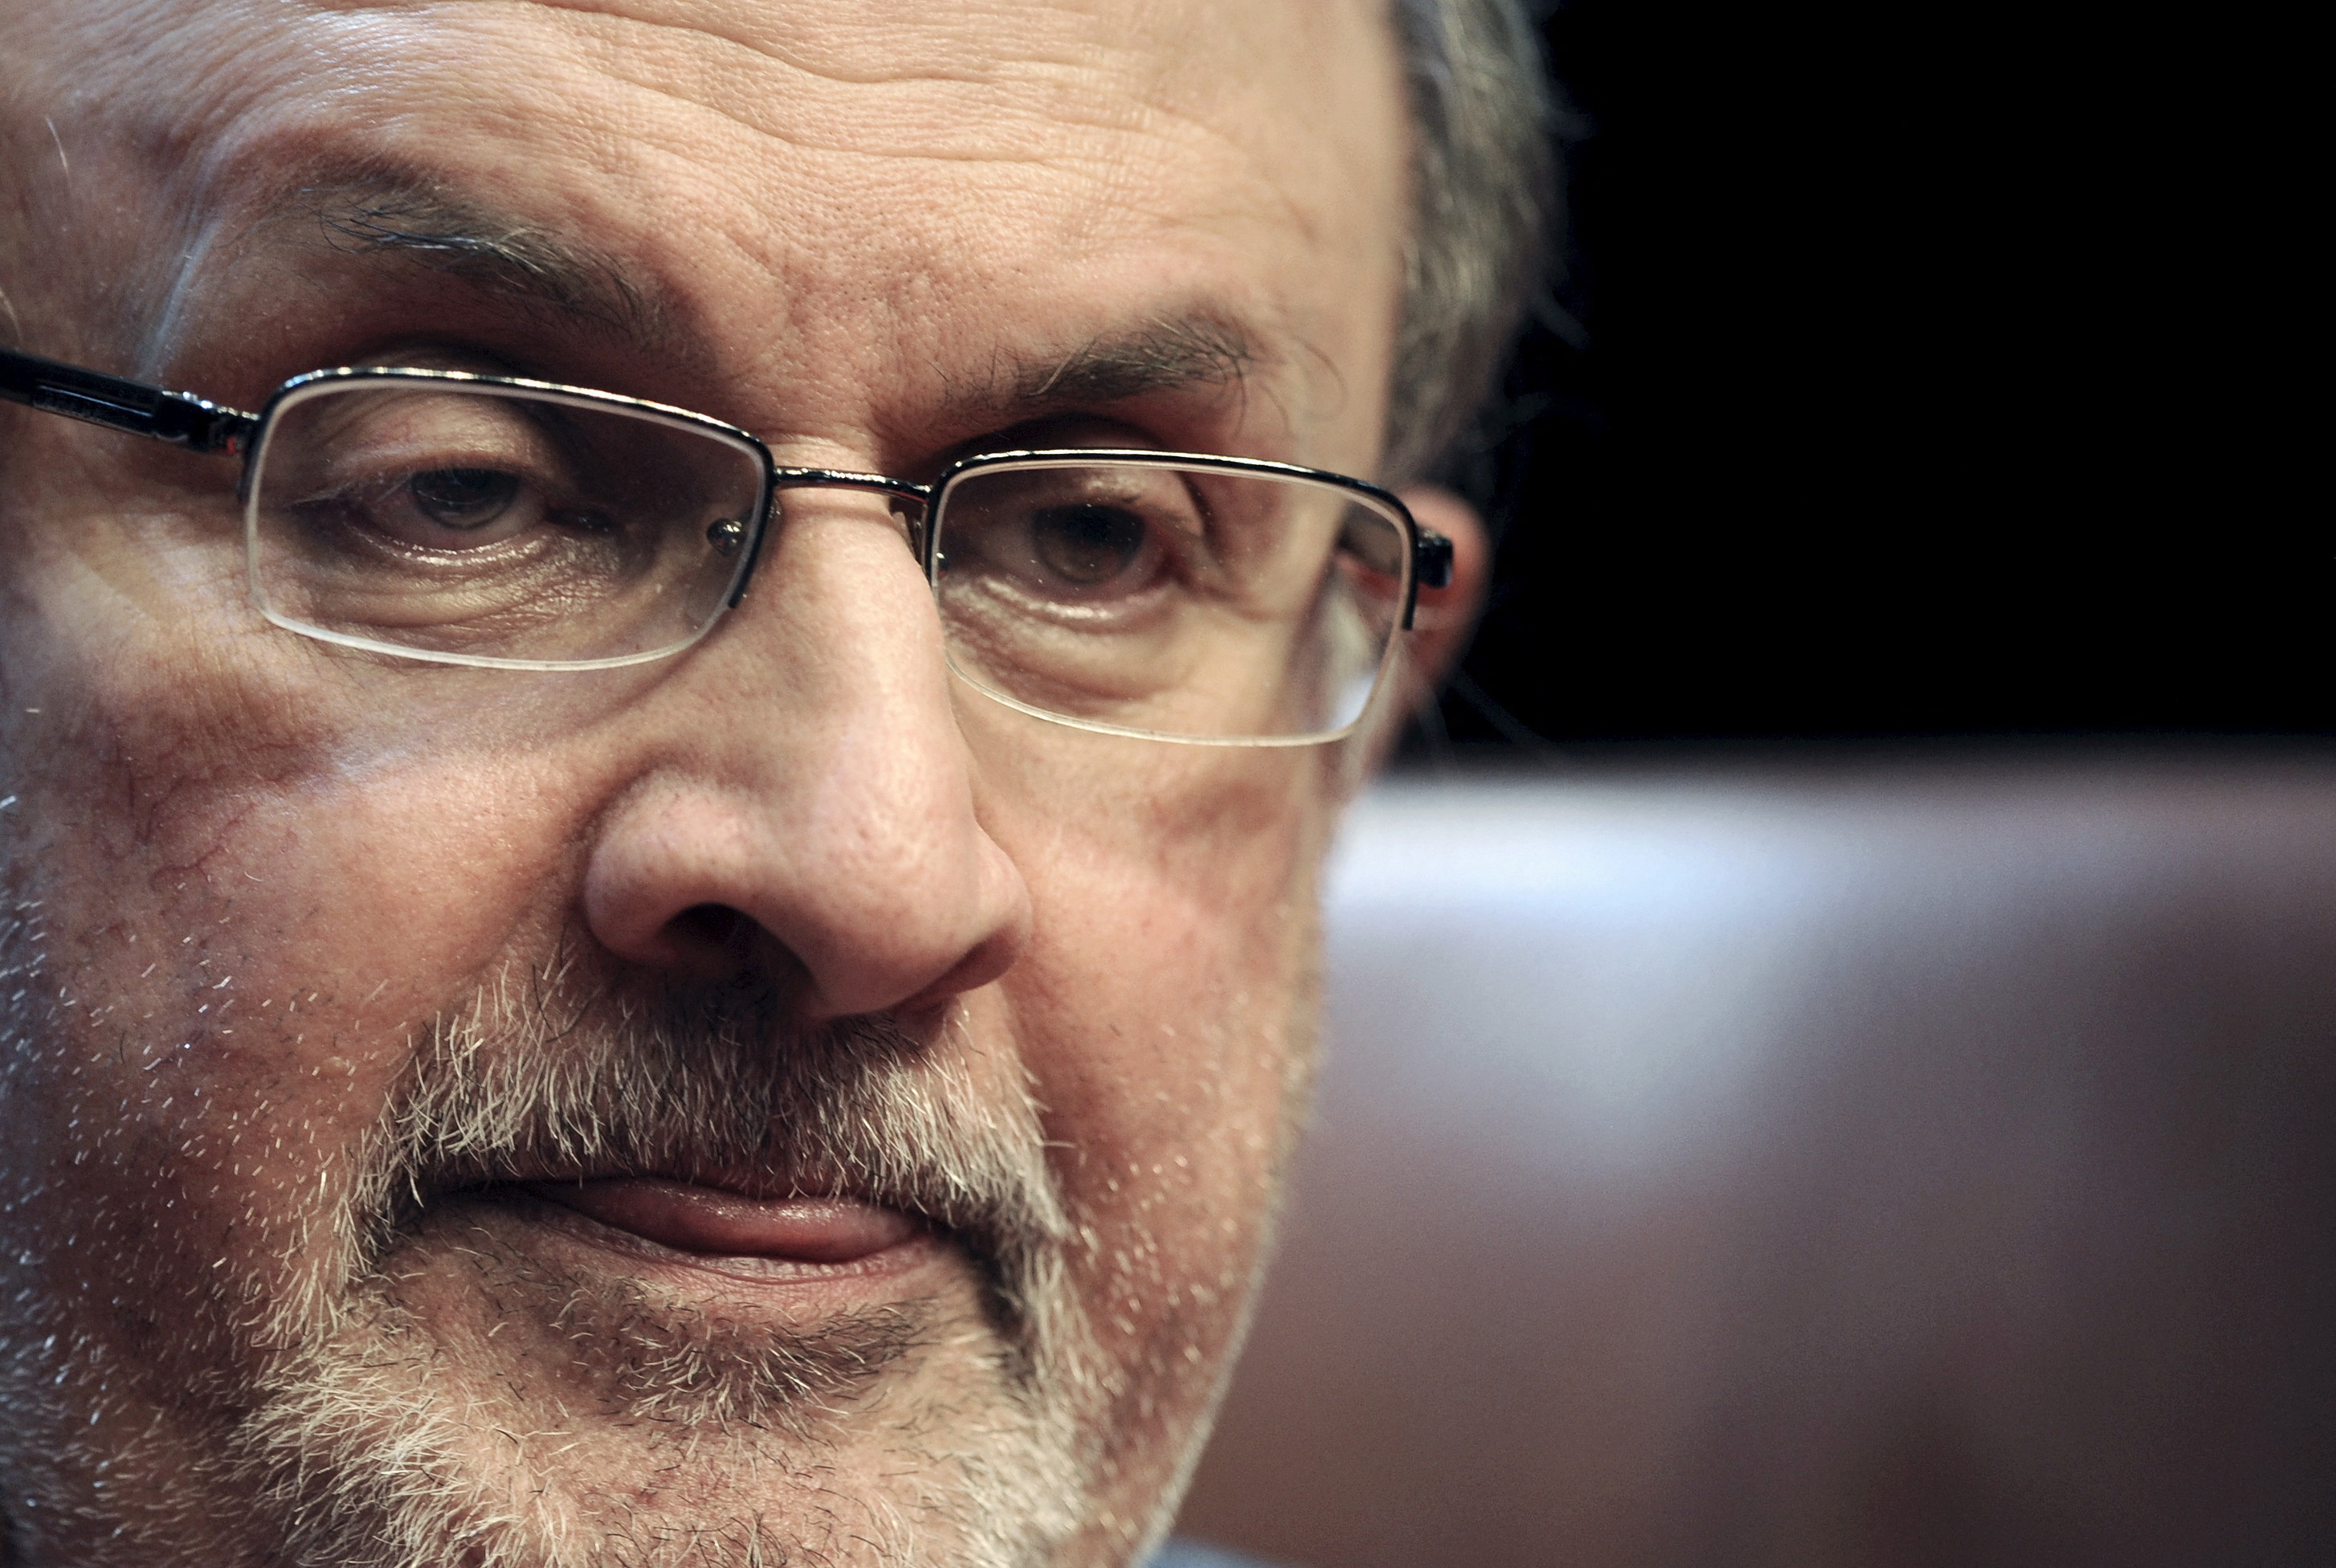 Author Rushdie reacts during a news conference before the presentation of his latest book 'Two Years Eight Months and Twenty-Eight Nights' at the Niemeyer Center in Aviles